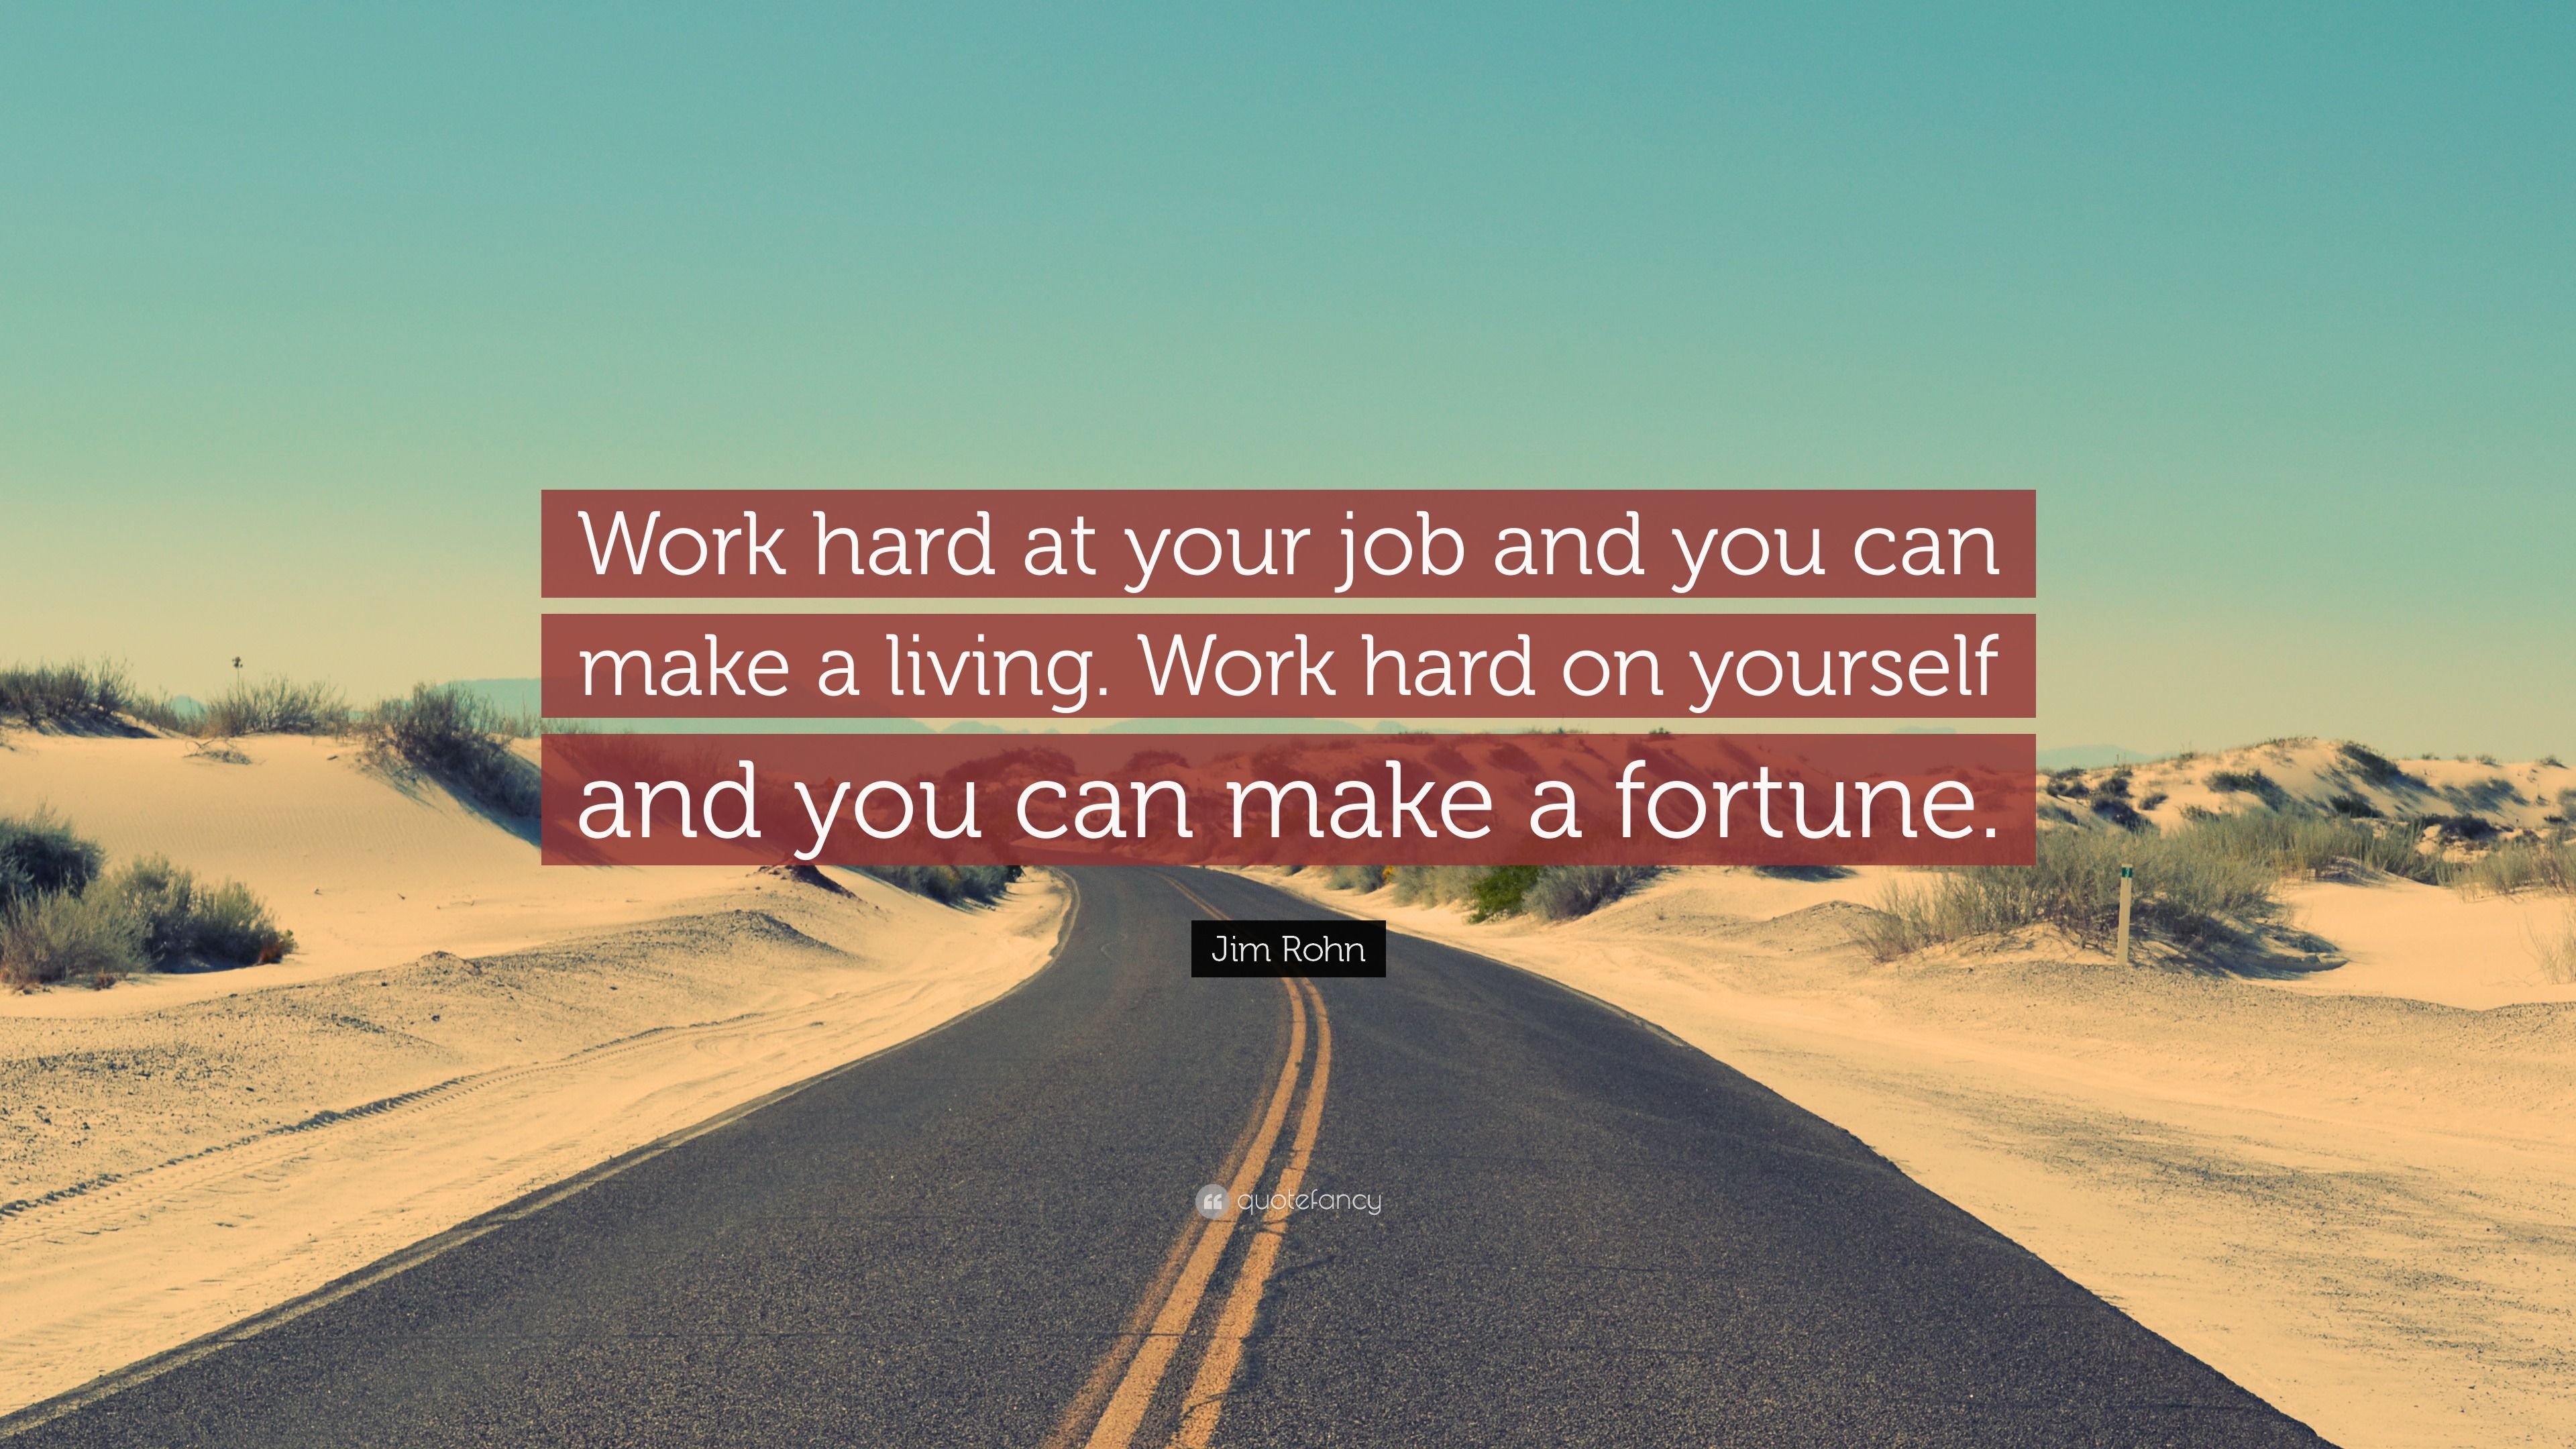 Jim Rohn Quote “Work hard at your job and you can make a living